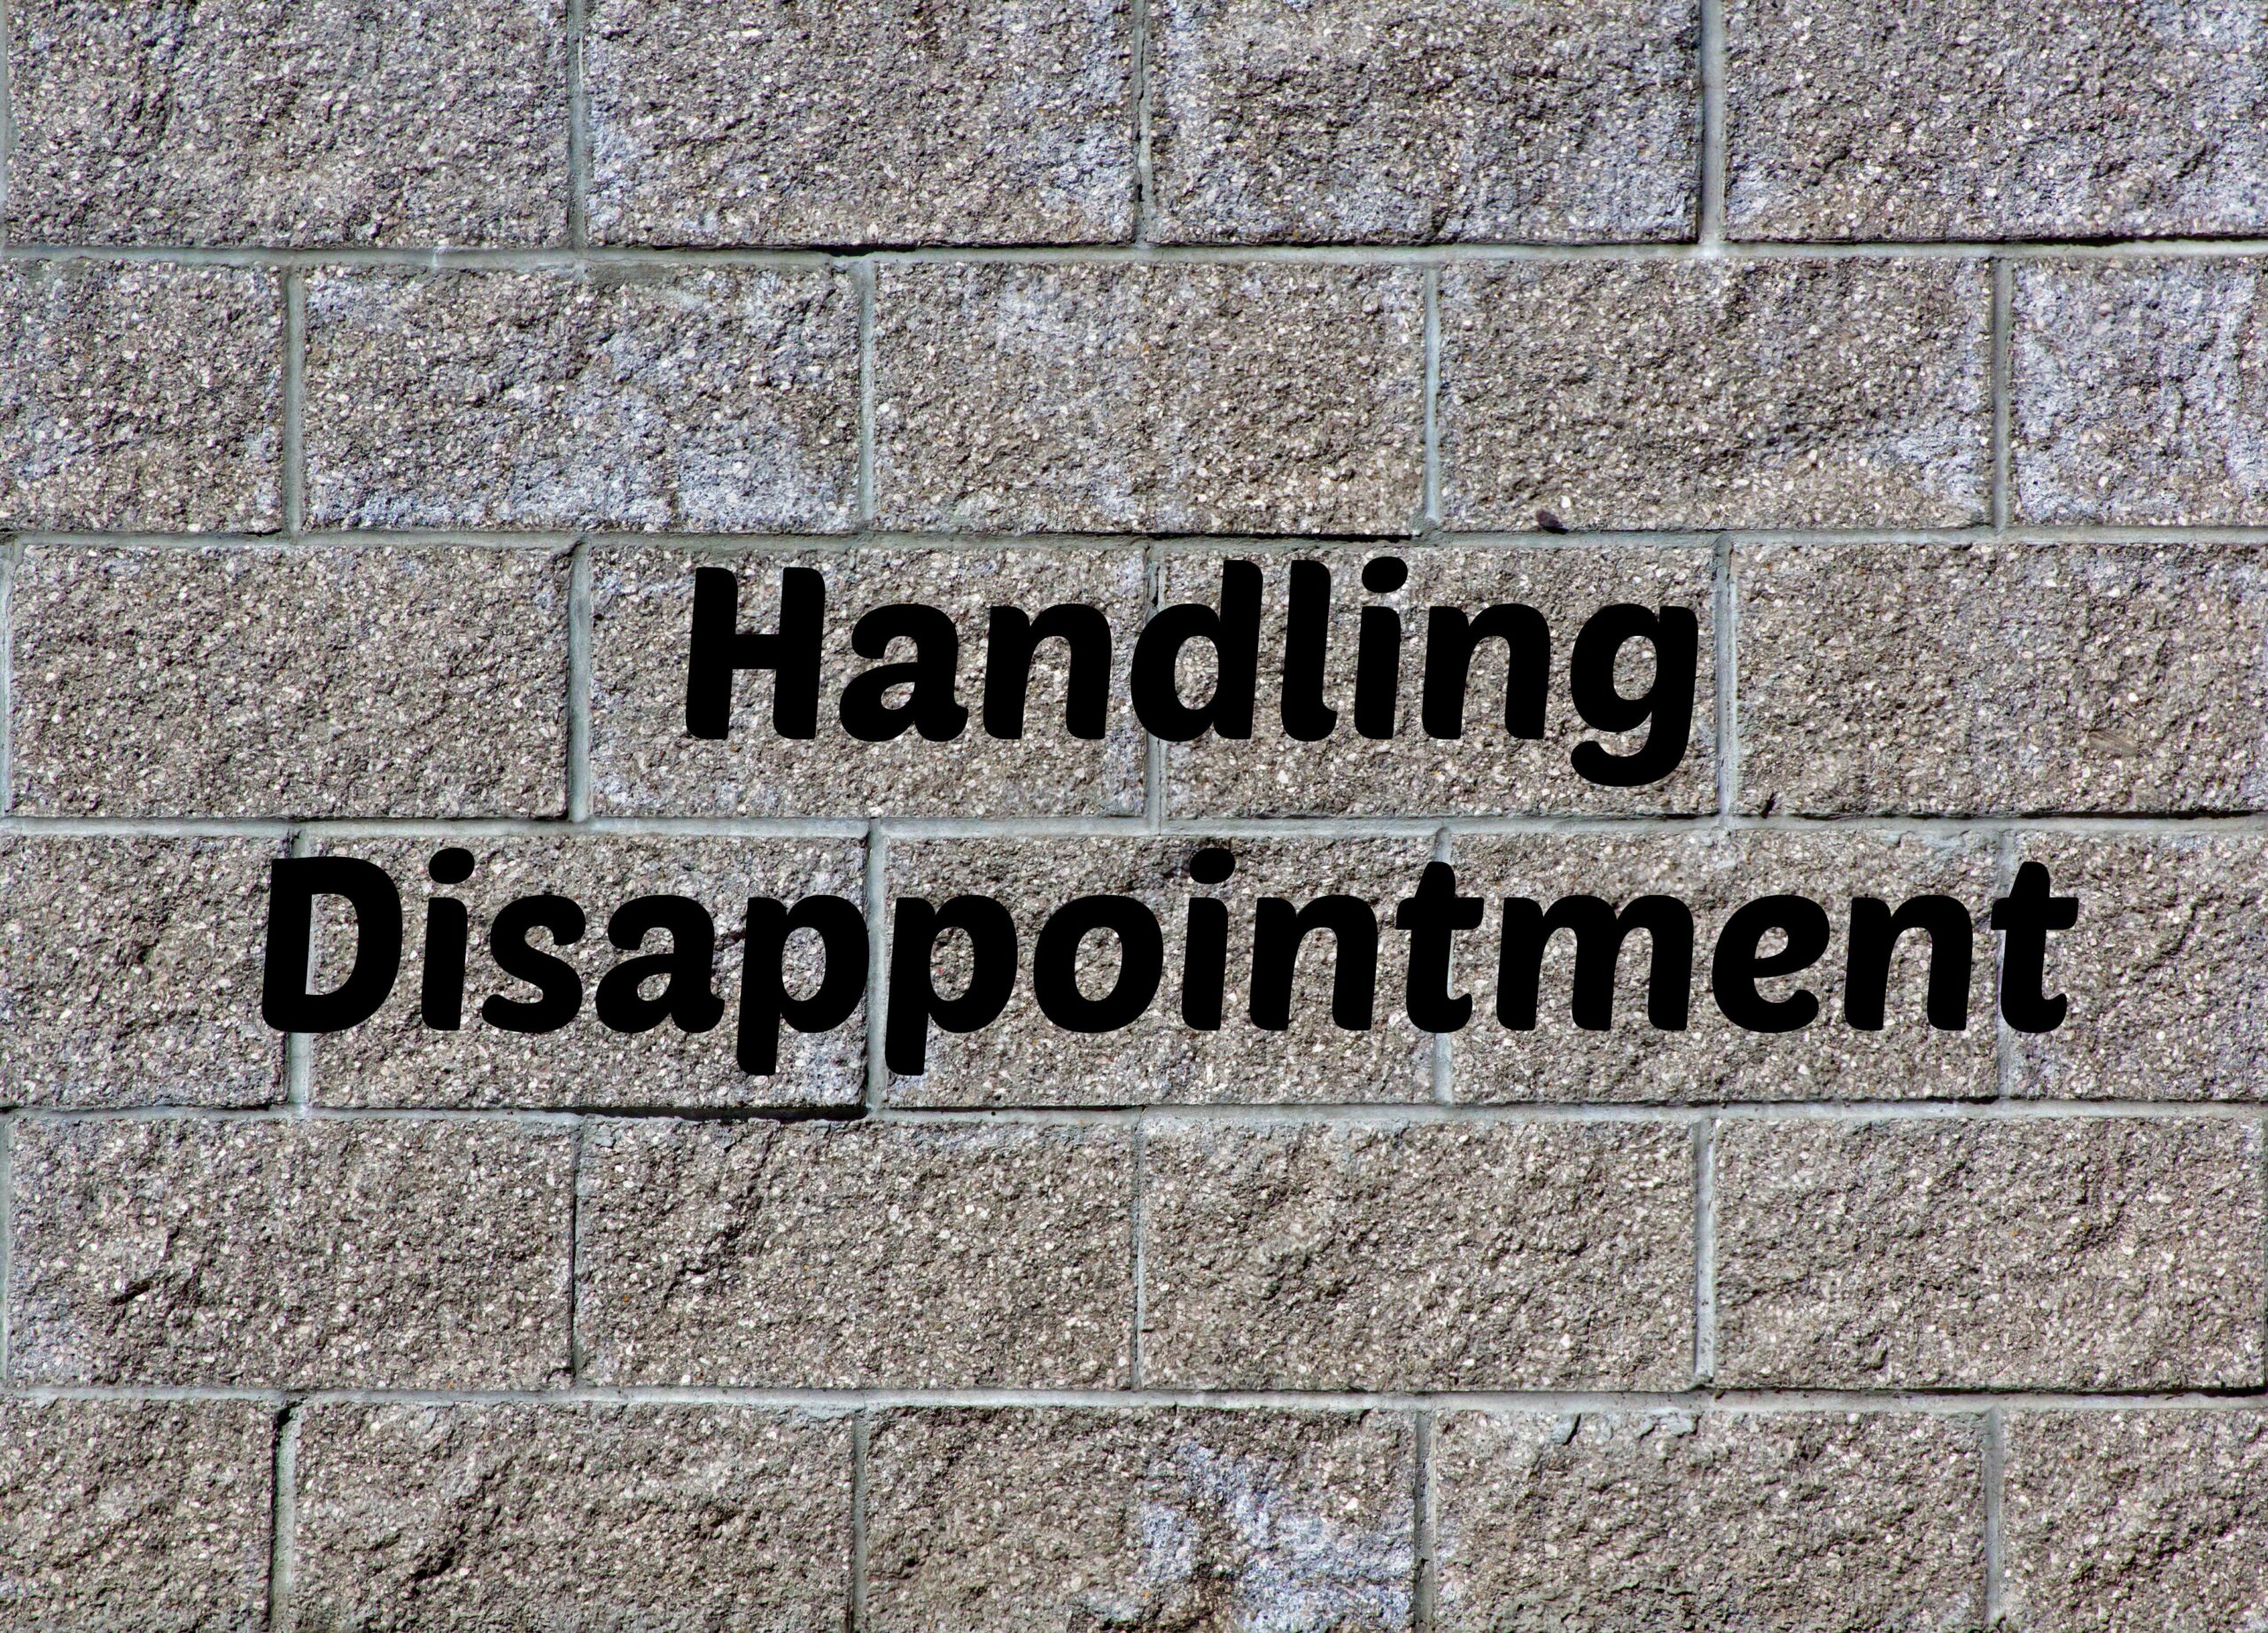 Handling Disappointment